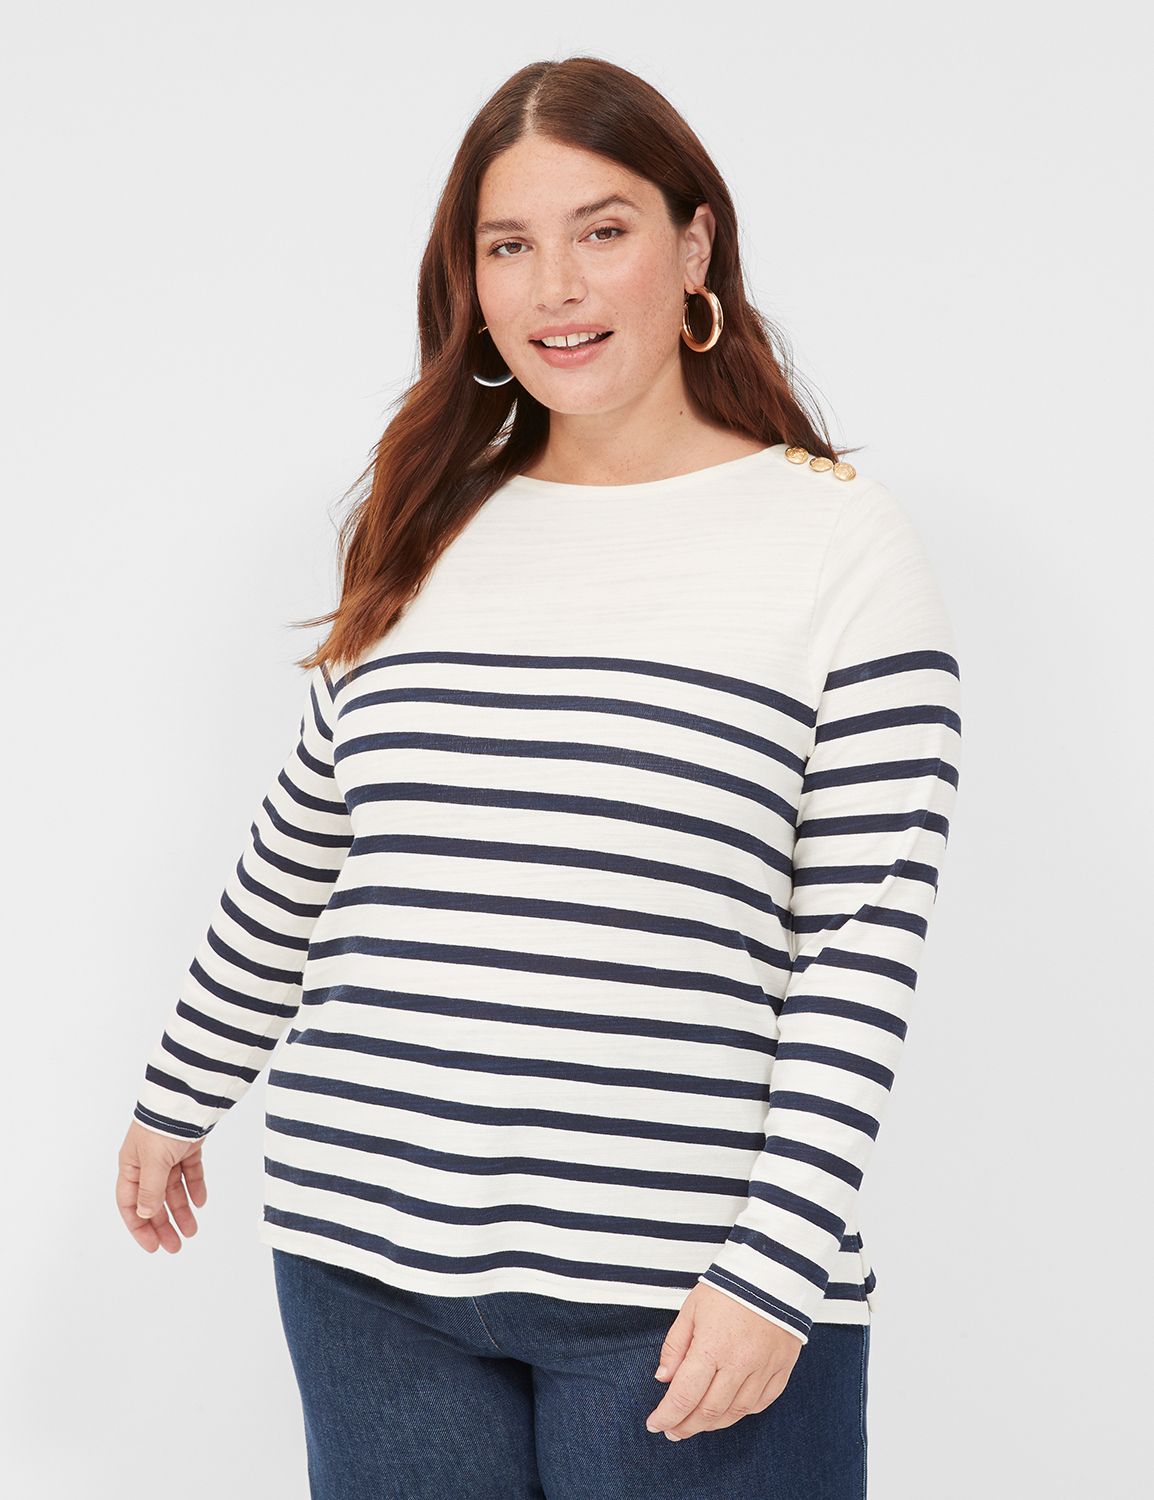 Clearance: Women's Plus Clothing